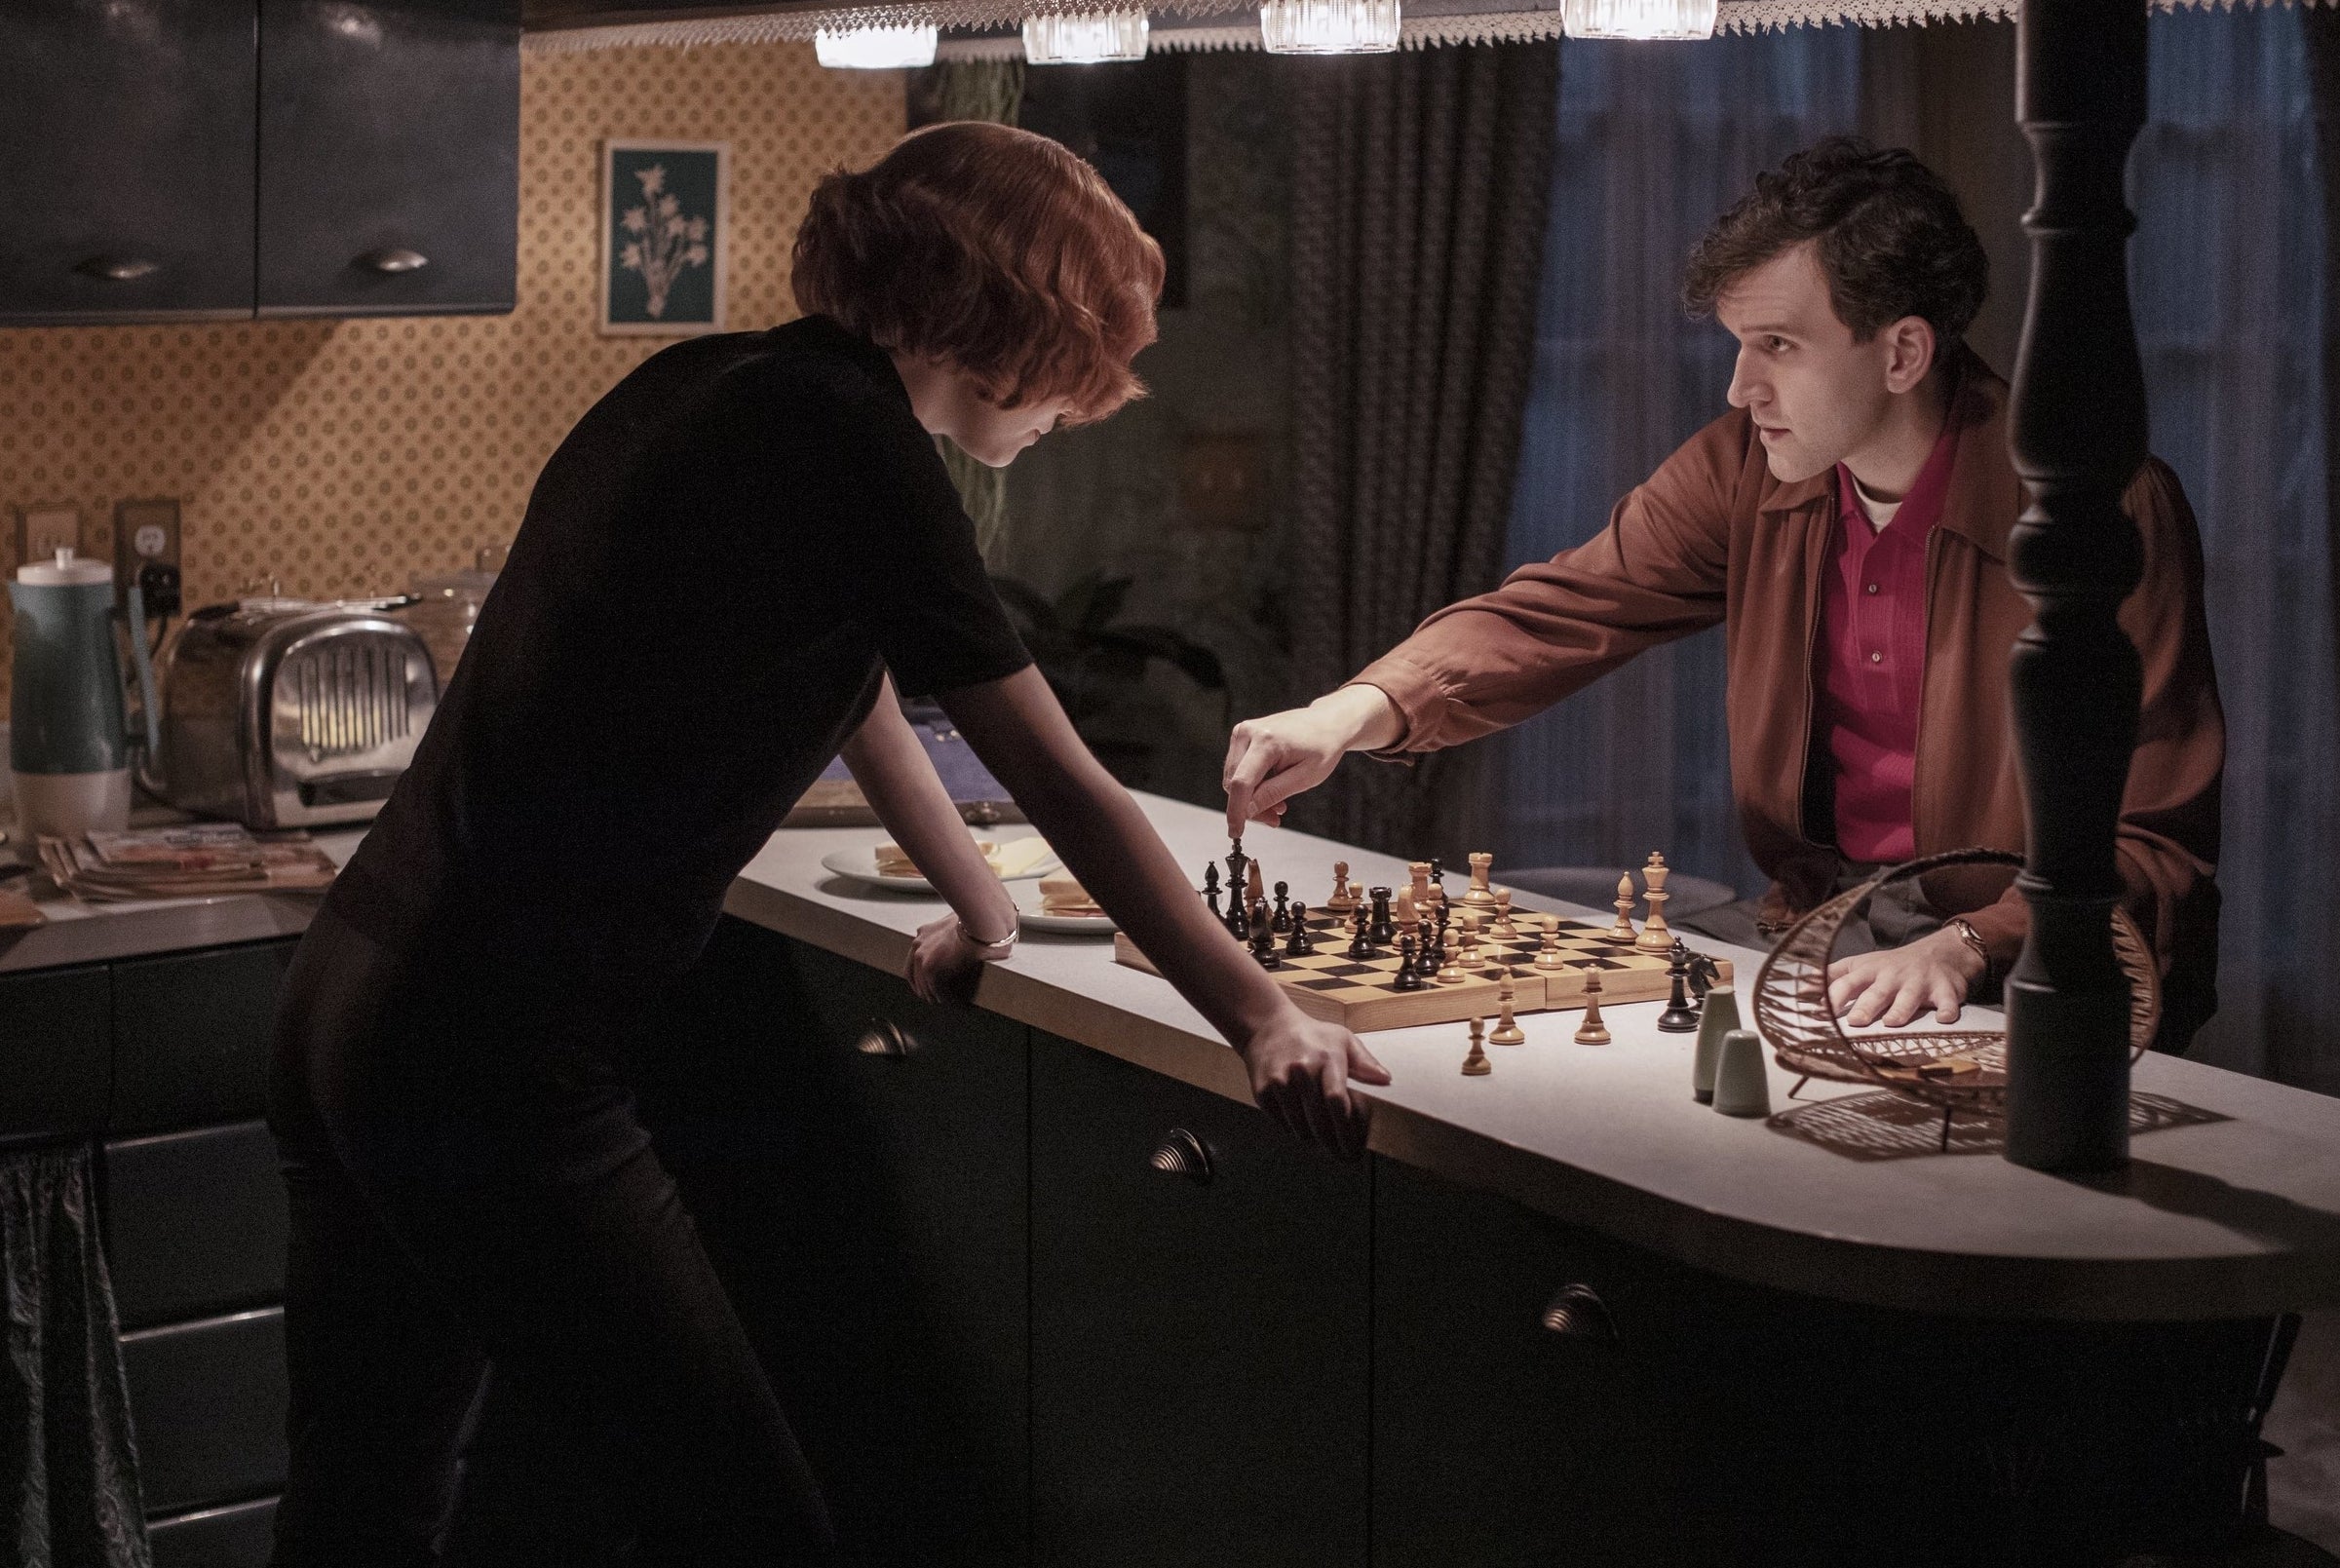 Anya and Harry playing against each other in a kitchen